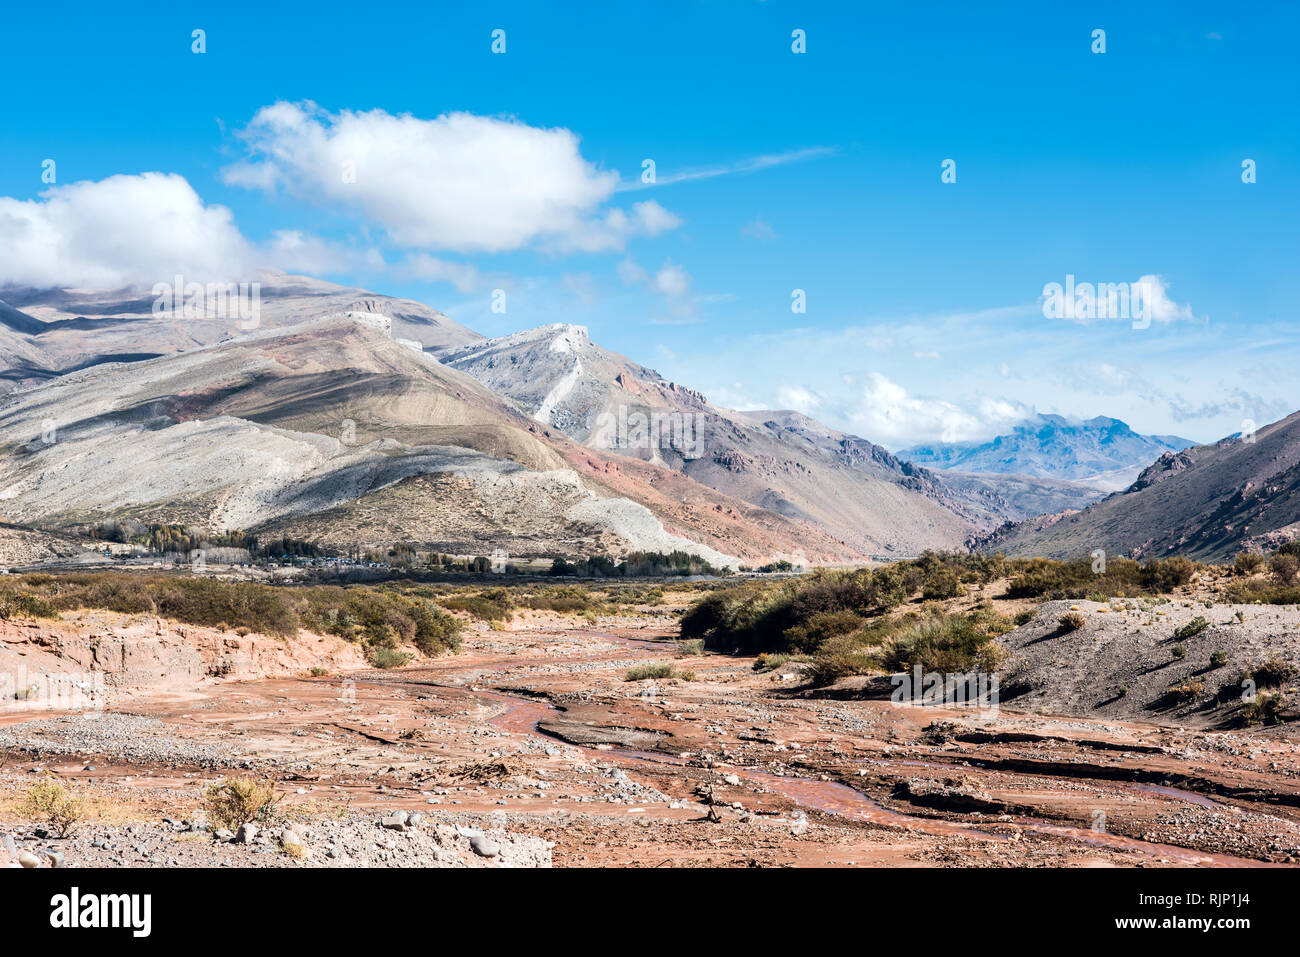 Layered sedimentary rocks in the colorful valley of the Rio Grande (Spanish for 'great river'), south of Mendoza Province, Argentina Stock Photo